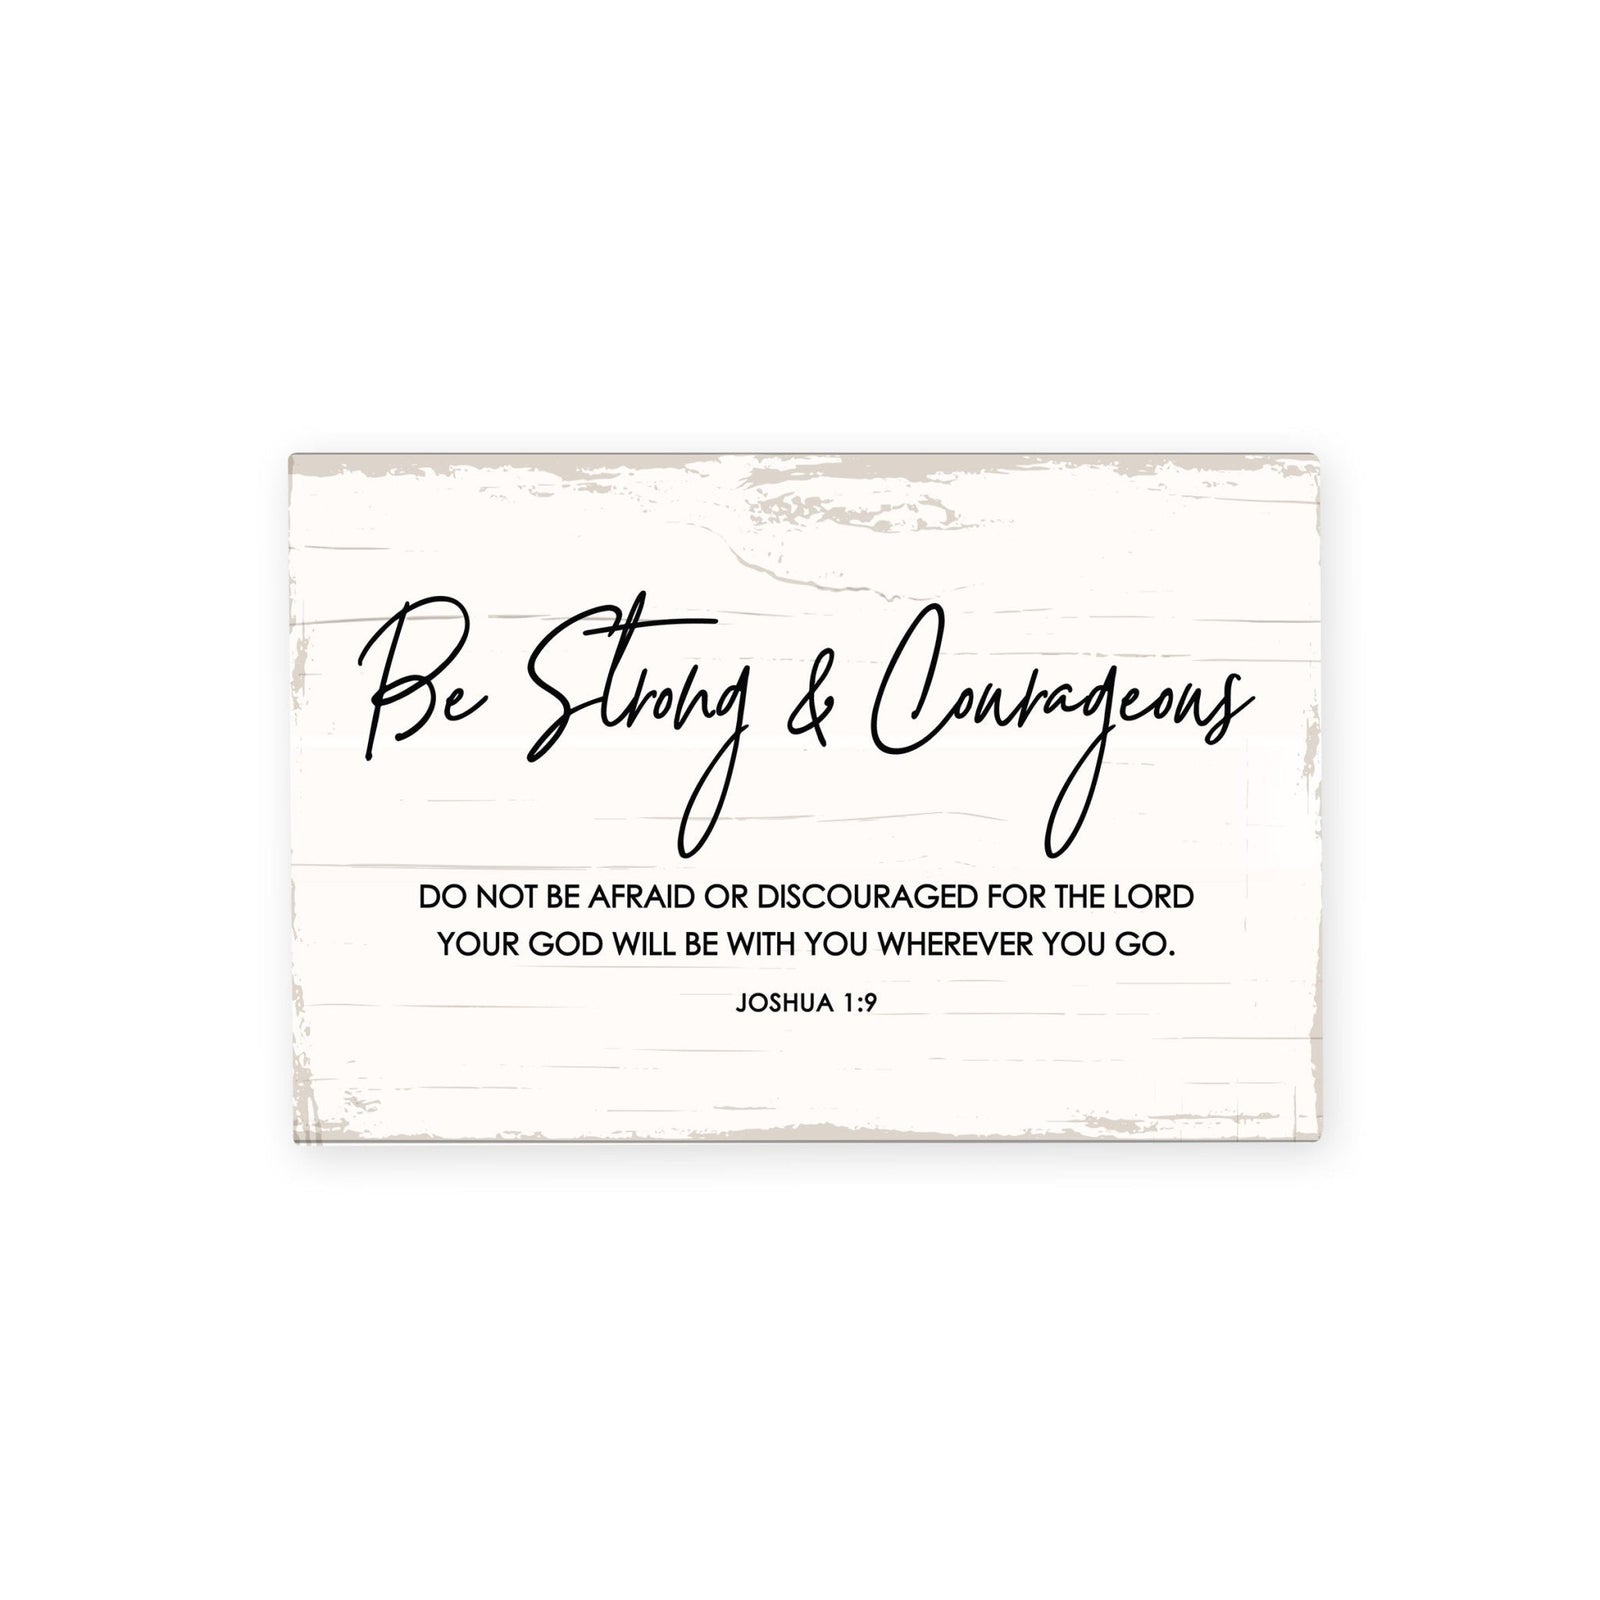 Modern Inspirational 5.5x8in Wooden Plaque Family And Home Tabletop Decor - Be Strong & Courageous - LifeSong Milestones